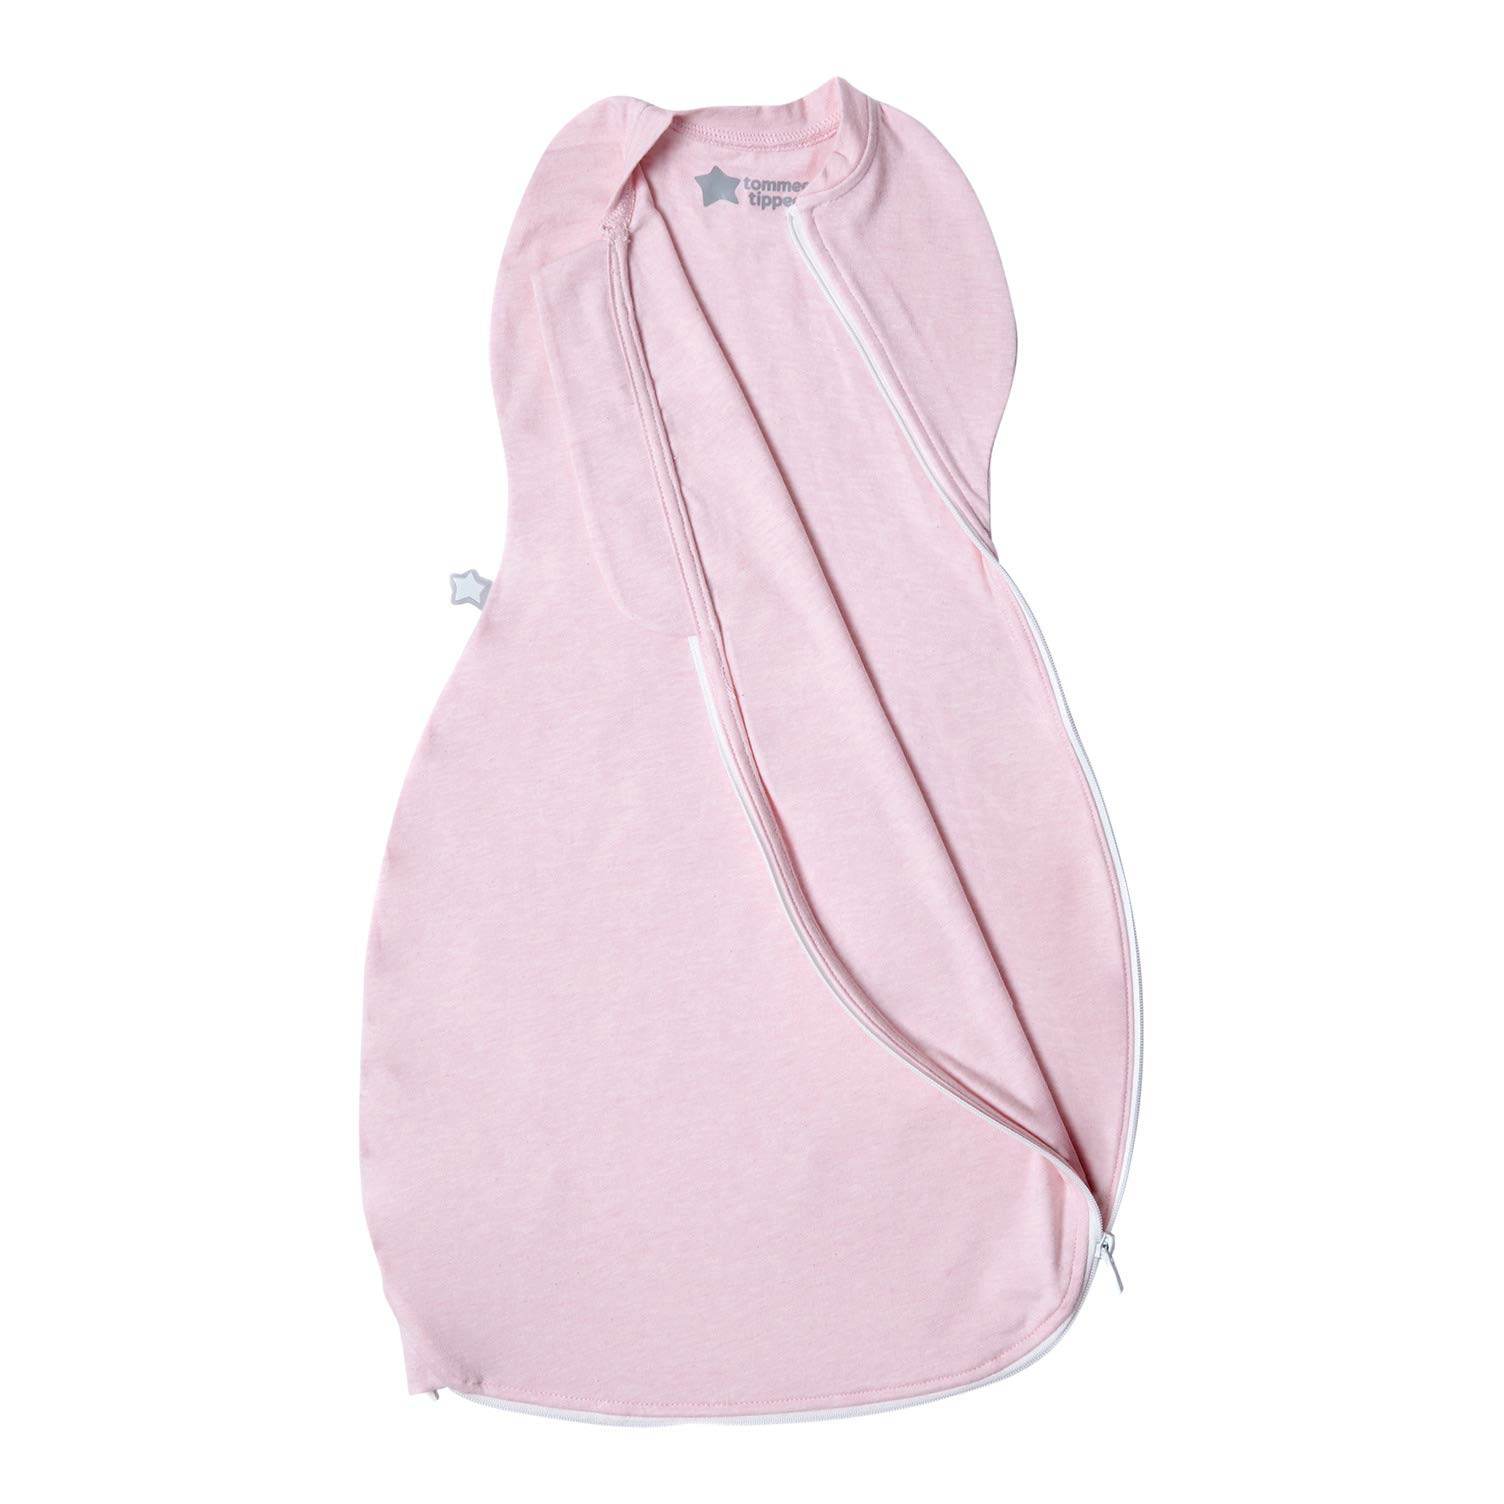 Tommee Tippee The Original Grobag, Newborn Easy Swaddle, 0-3 Months, Pink  Marl – RissaBaby Nursery